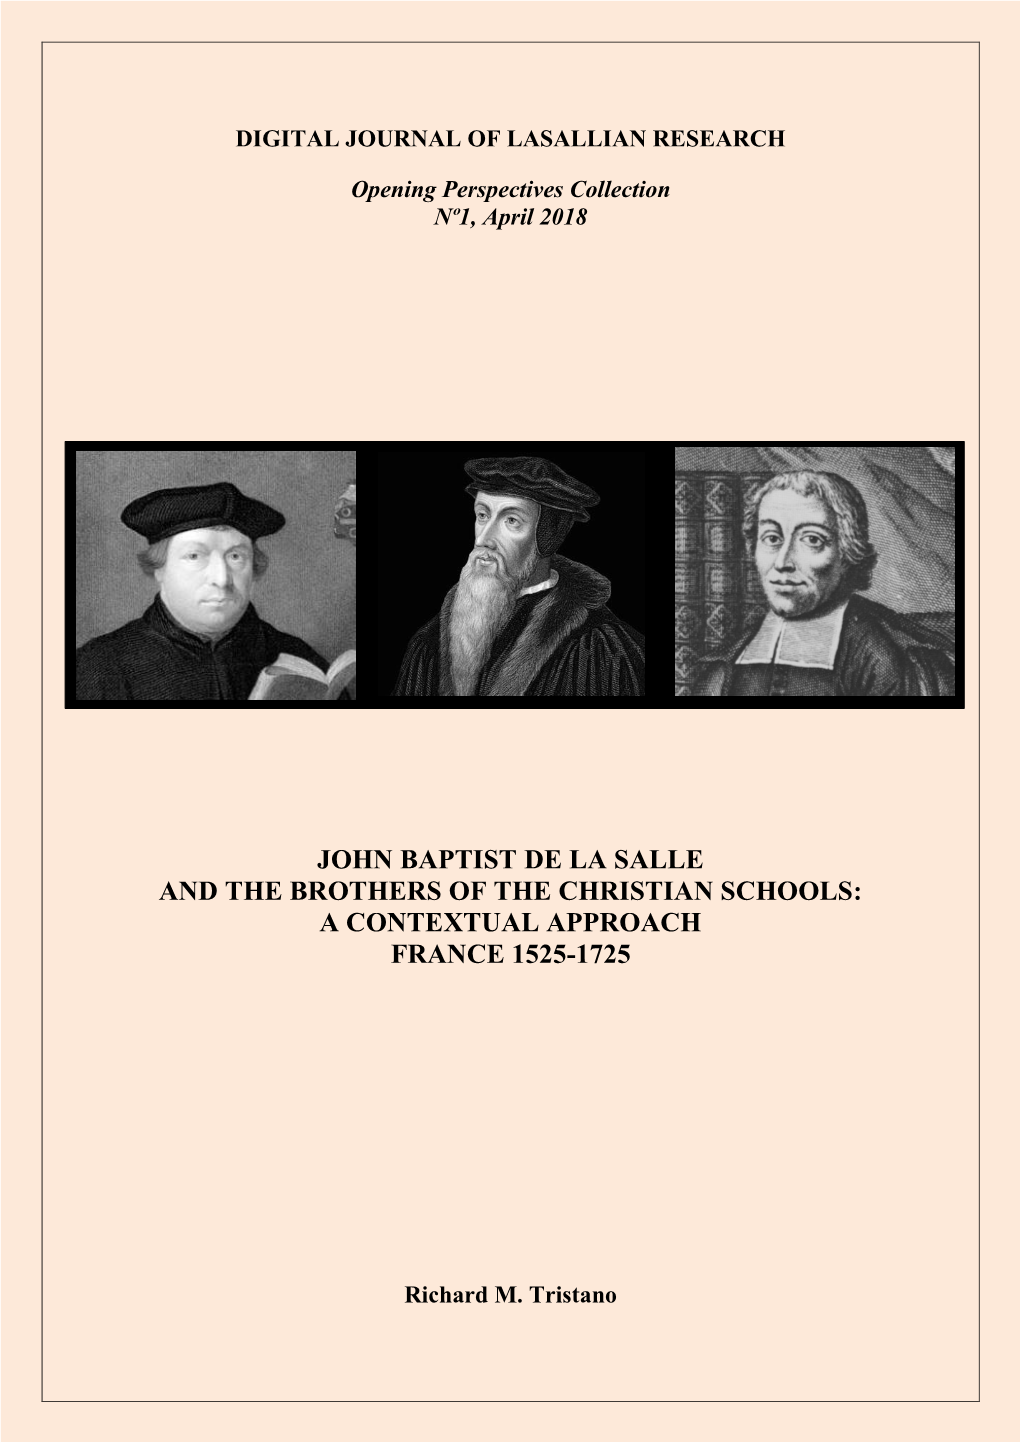 John Baptist De La Salle and the Brothers of the Christian Schools: a Contextual Approach France 1525-1725